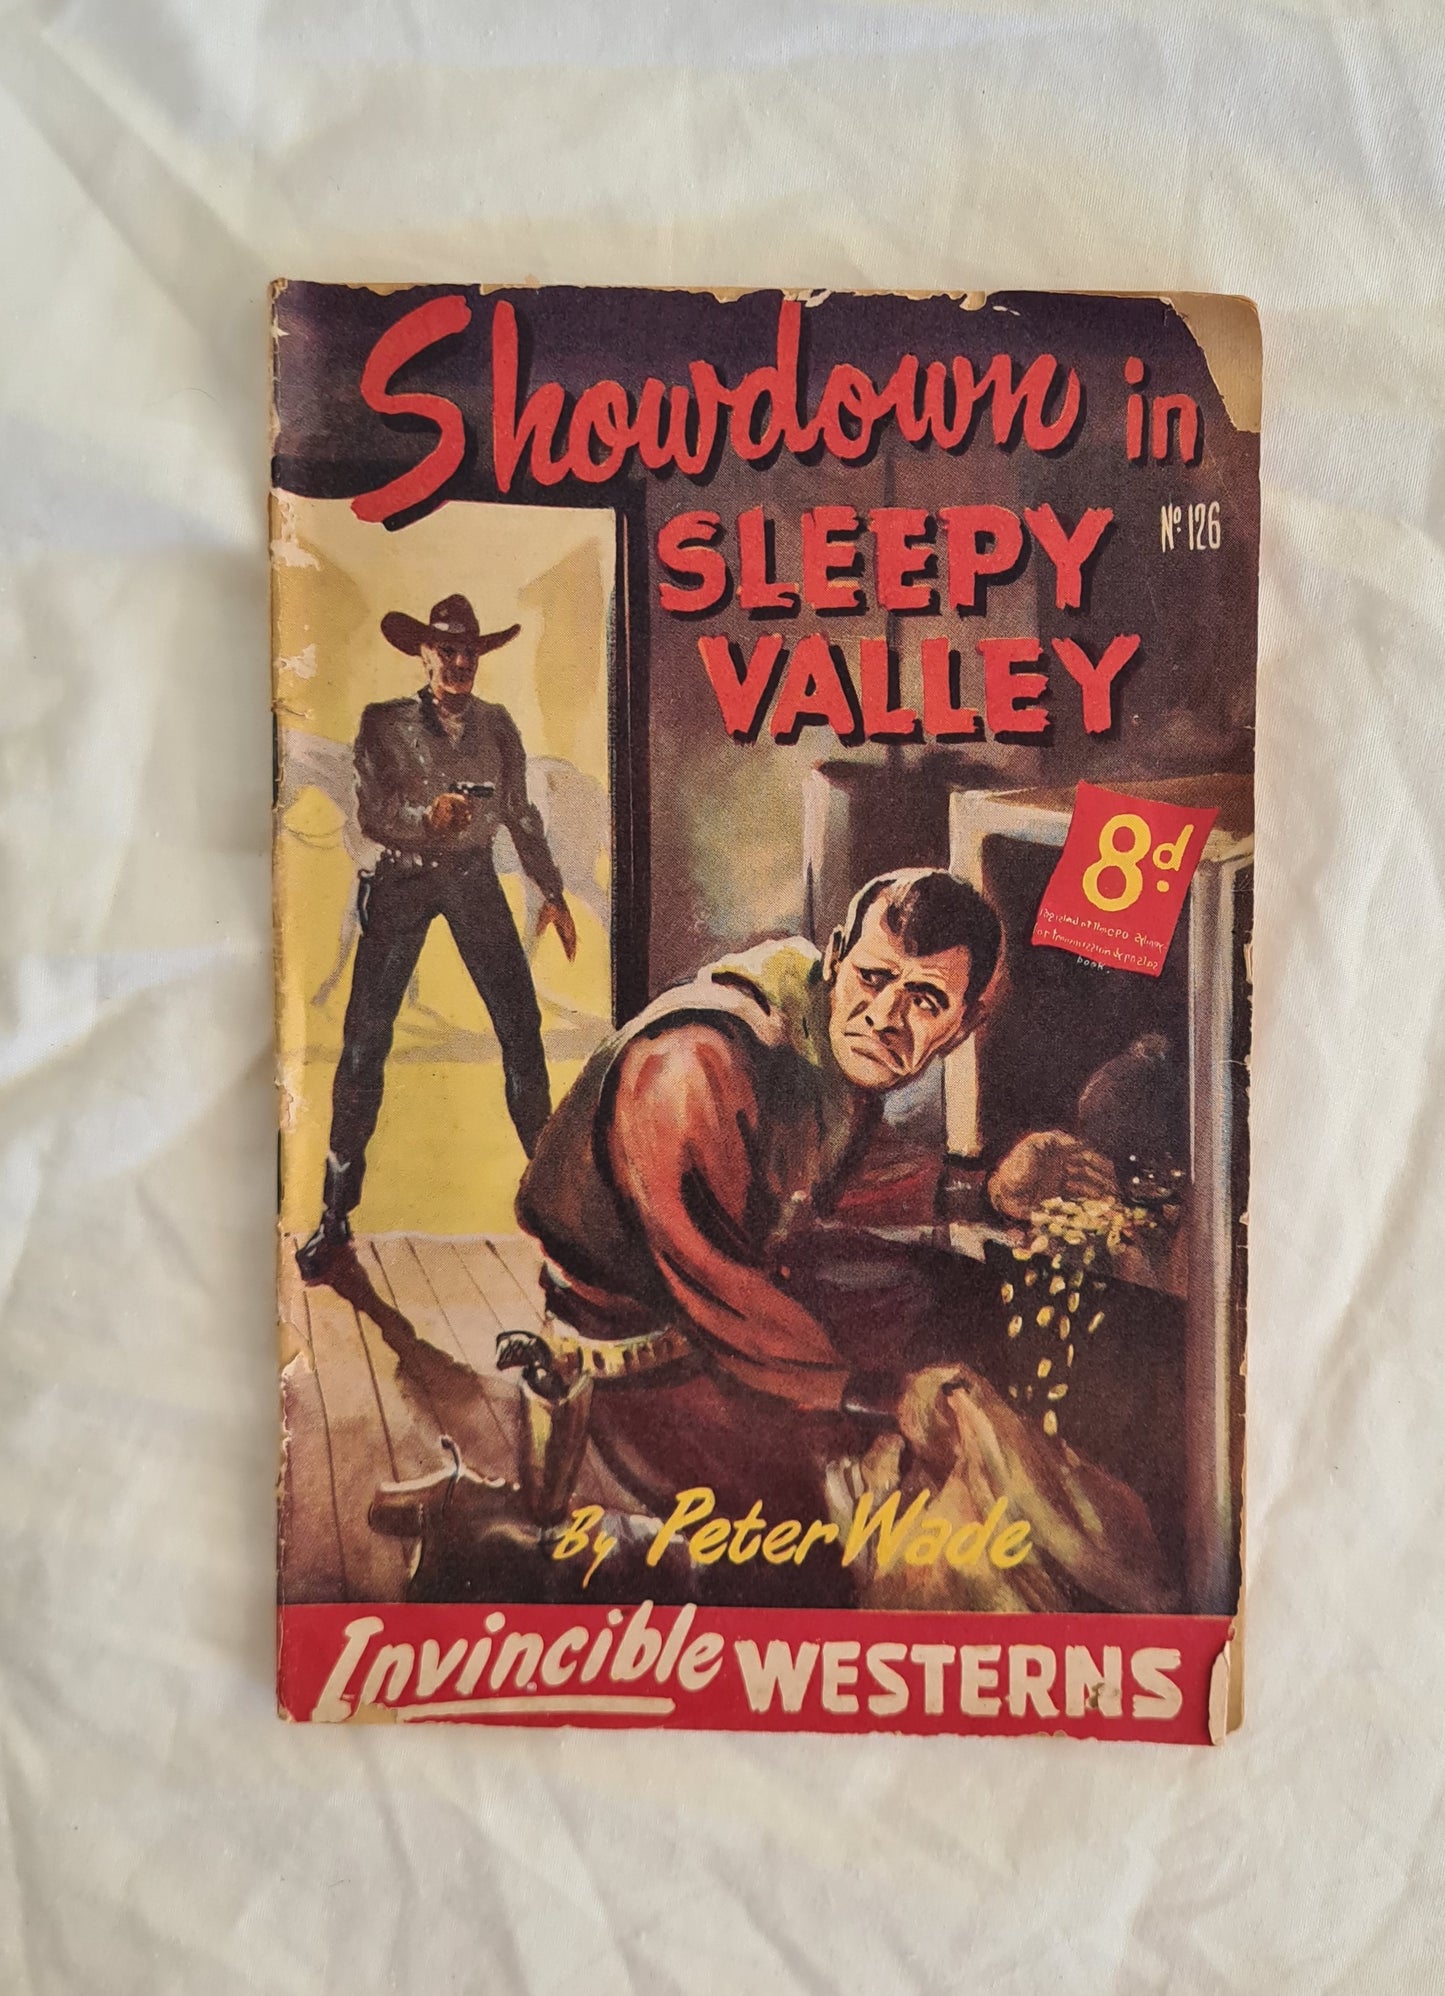 Showdown in Sleep Valley  by Peter Wade  Invincible Westerns No. 126